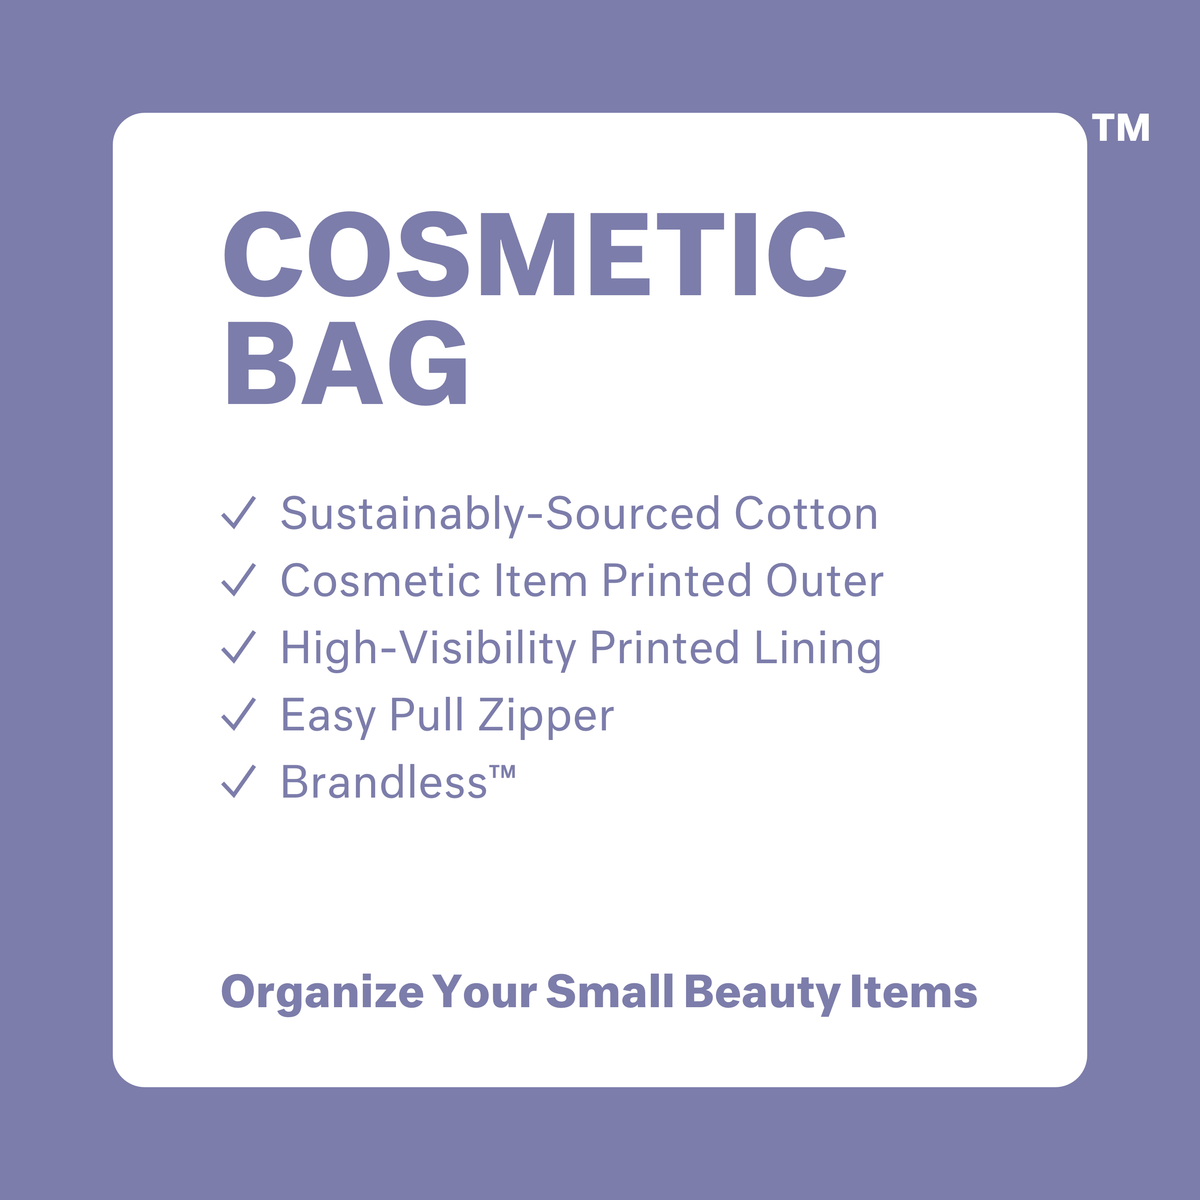 Cosmetic Bag: sustainably sourced cotton, cosmetic item printed outer, high visibility printed lining, easy pull zipper, brandless. Organize your small beauty items.